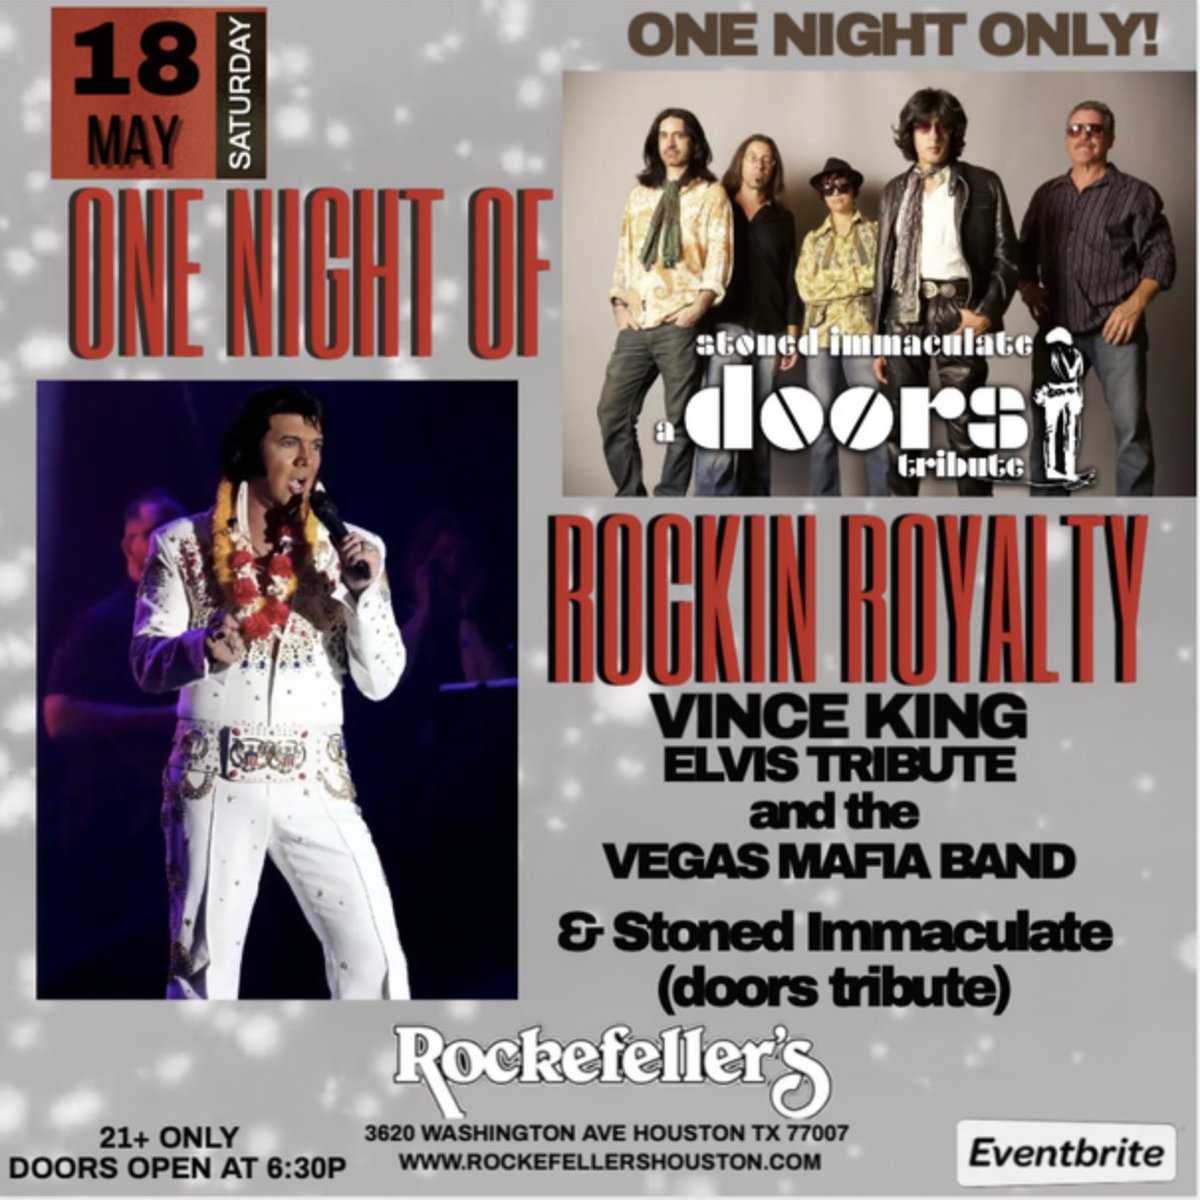 GOT YOUR TICKETS YET ? VINCE KING's #ELVIS Tribute and Stoned Immaculate (the doors) Tribute in one night? YES PLEASE! One Night Only ! MAY 18th at Rockefellers Houston - On sale now at Eventbrite while they last! #doors #elvispresley #tribute #livemusic @eventbrite